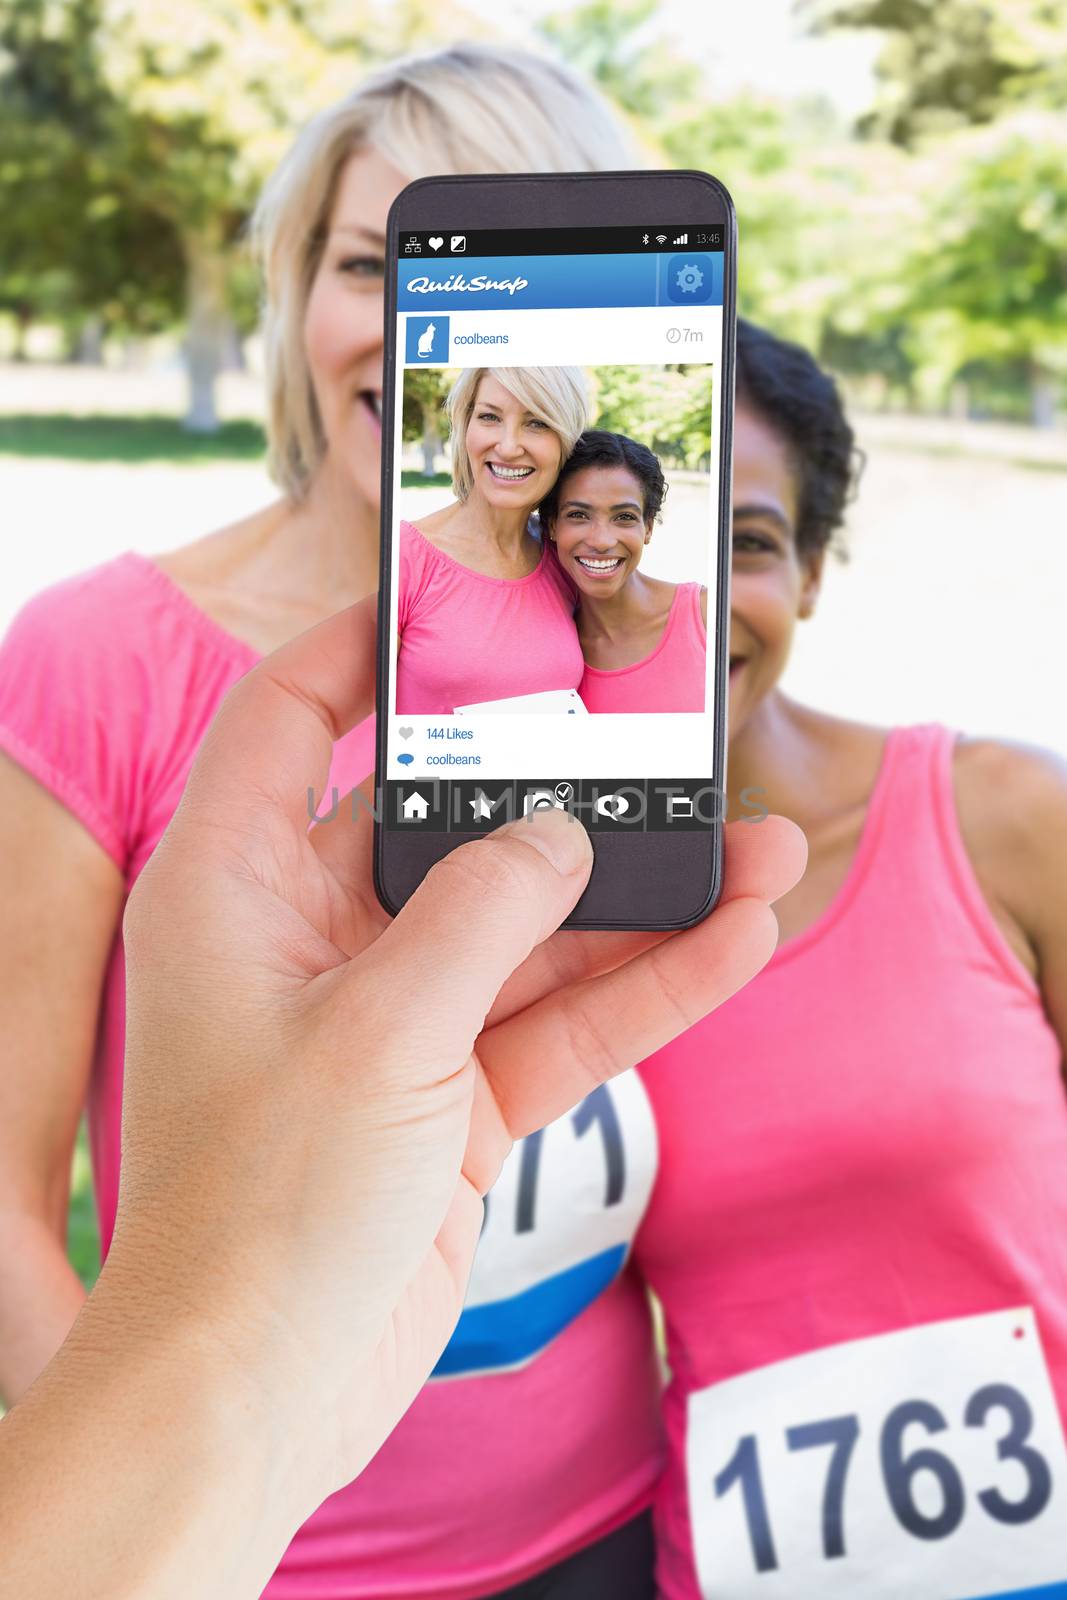 Female hand holding a smartphone against photo sharing app